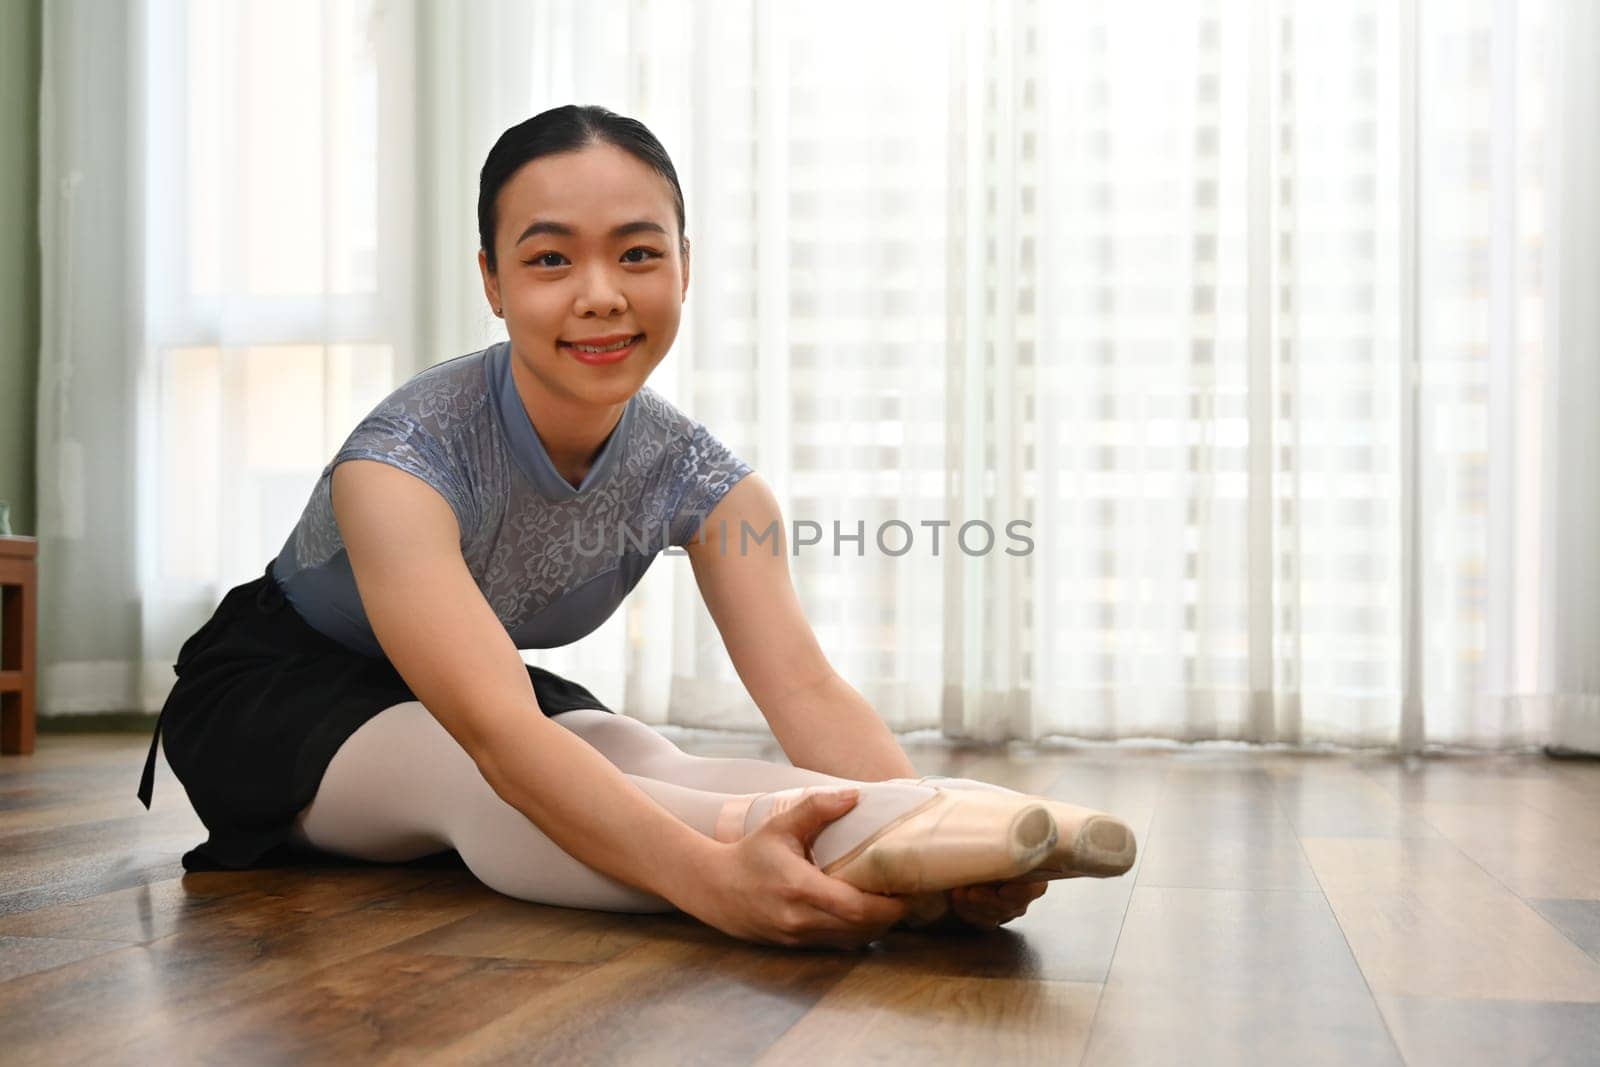 Beautiful ballerina sitting on the floor, warming up before dance class. Dance, art and flexibility concept.